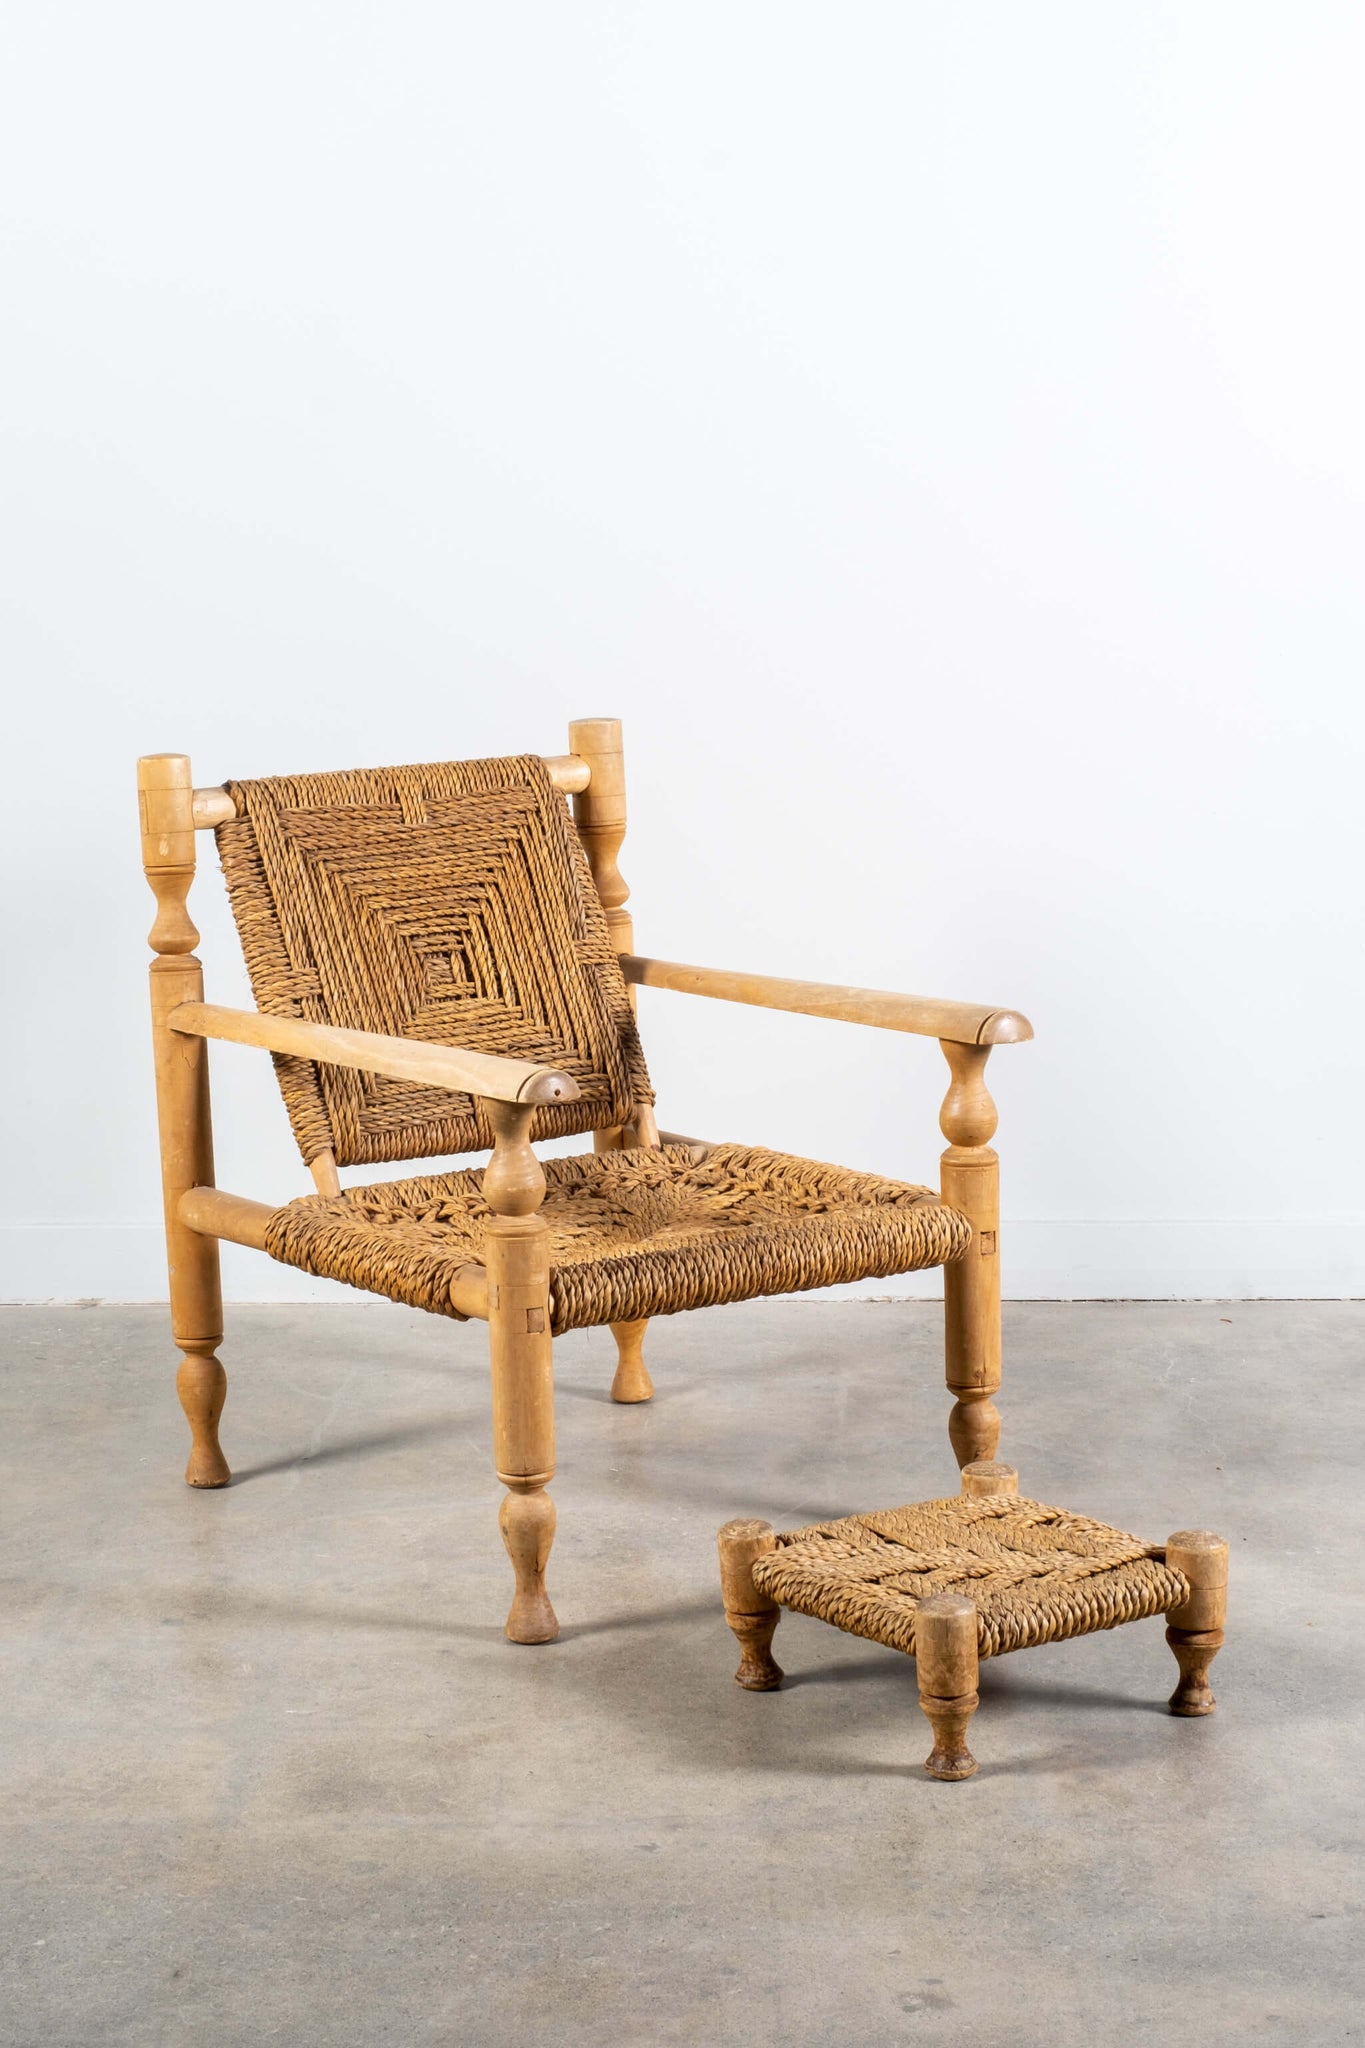 Vintage French Wood and Rope Armchairs with Footstools Adrien Audoux and Frida Minet, front angled view